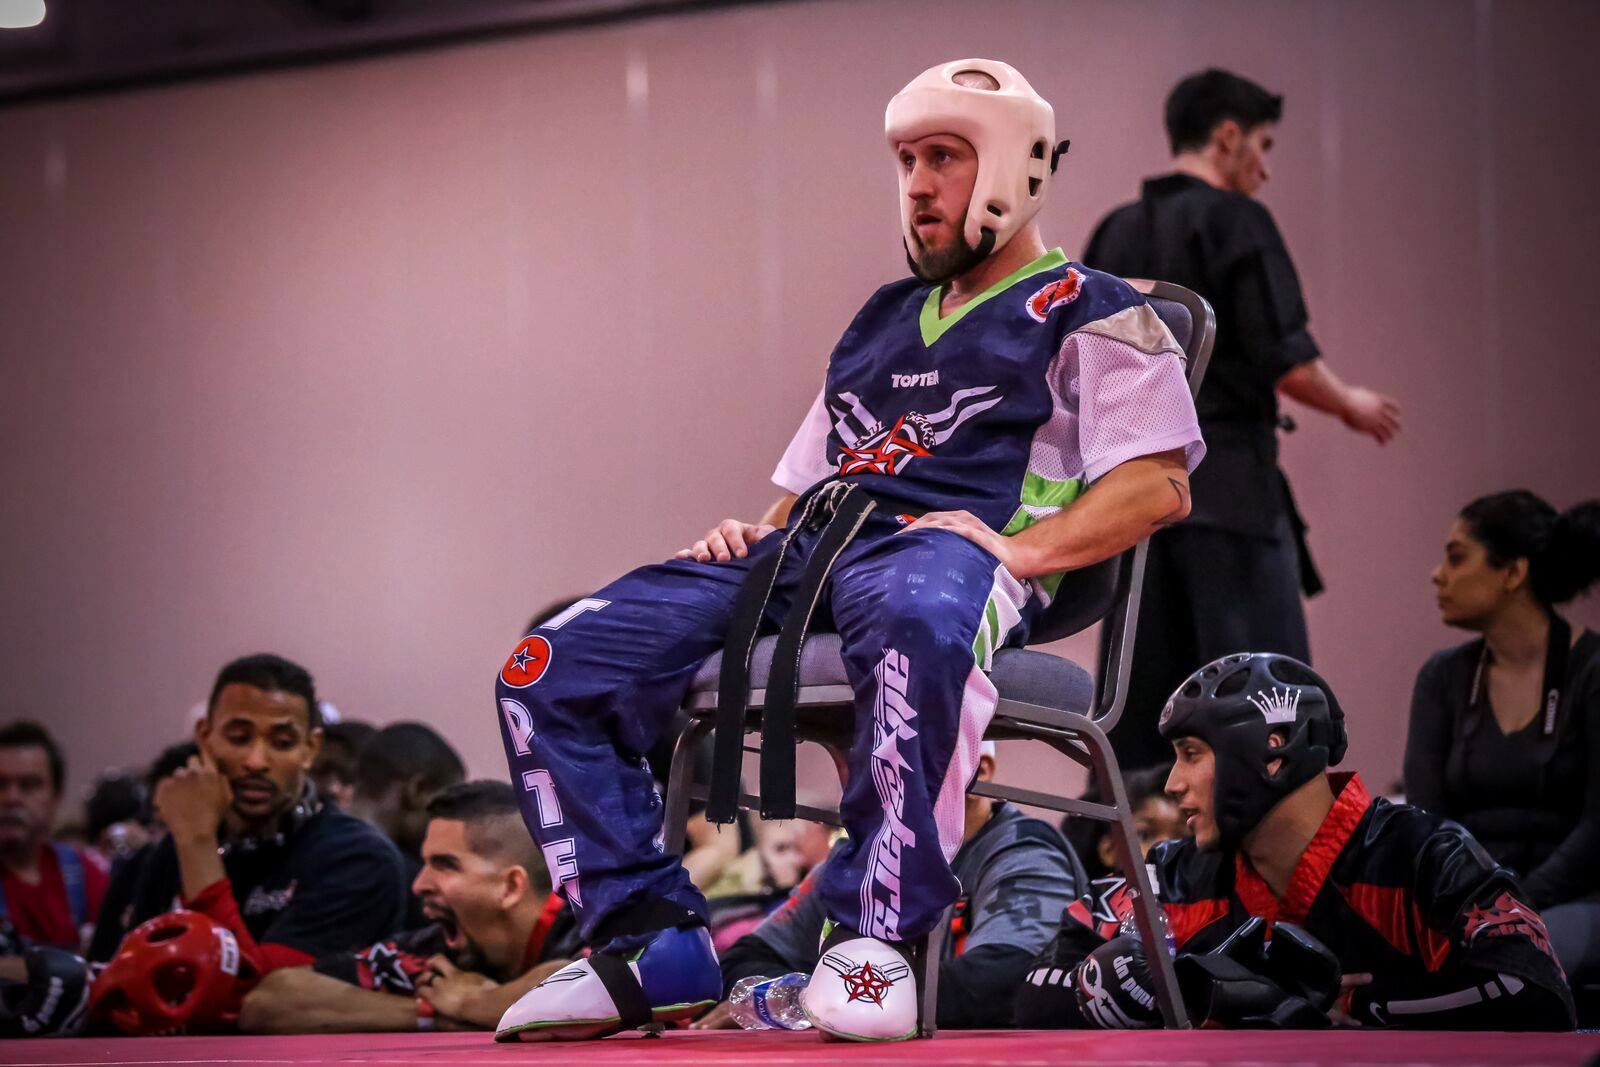 Tatami Fighter Profile: An Interview with Robbie Lavoie